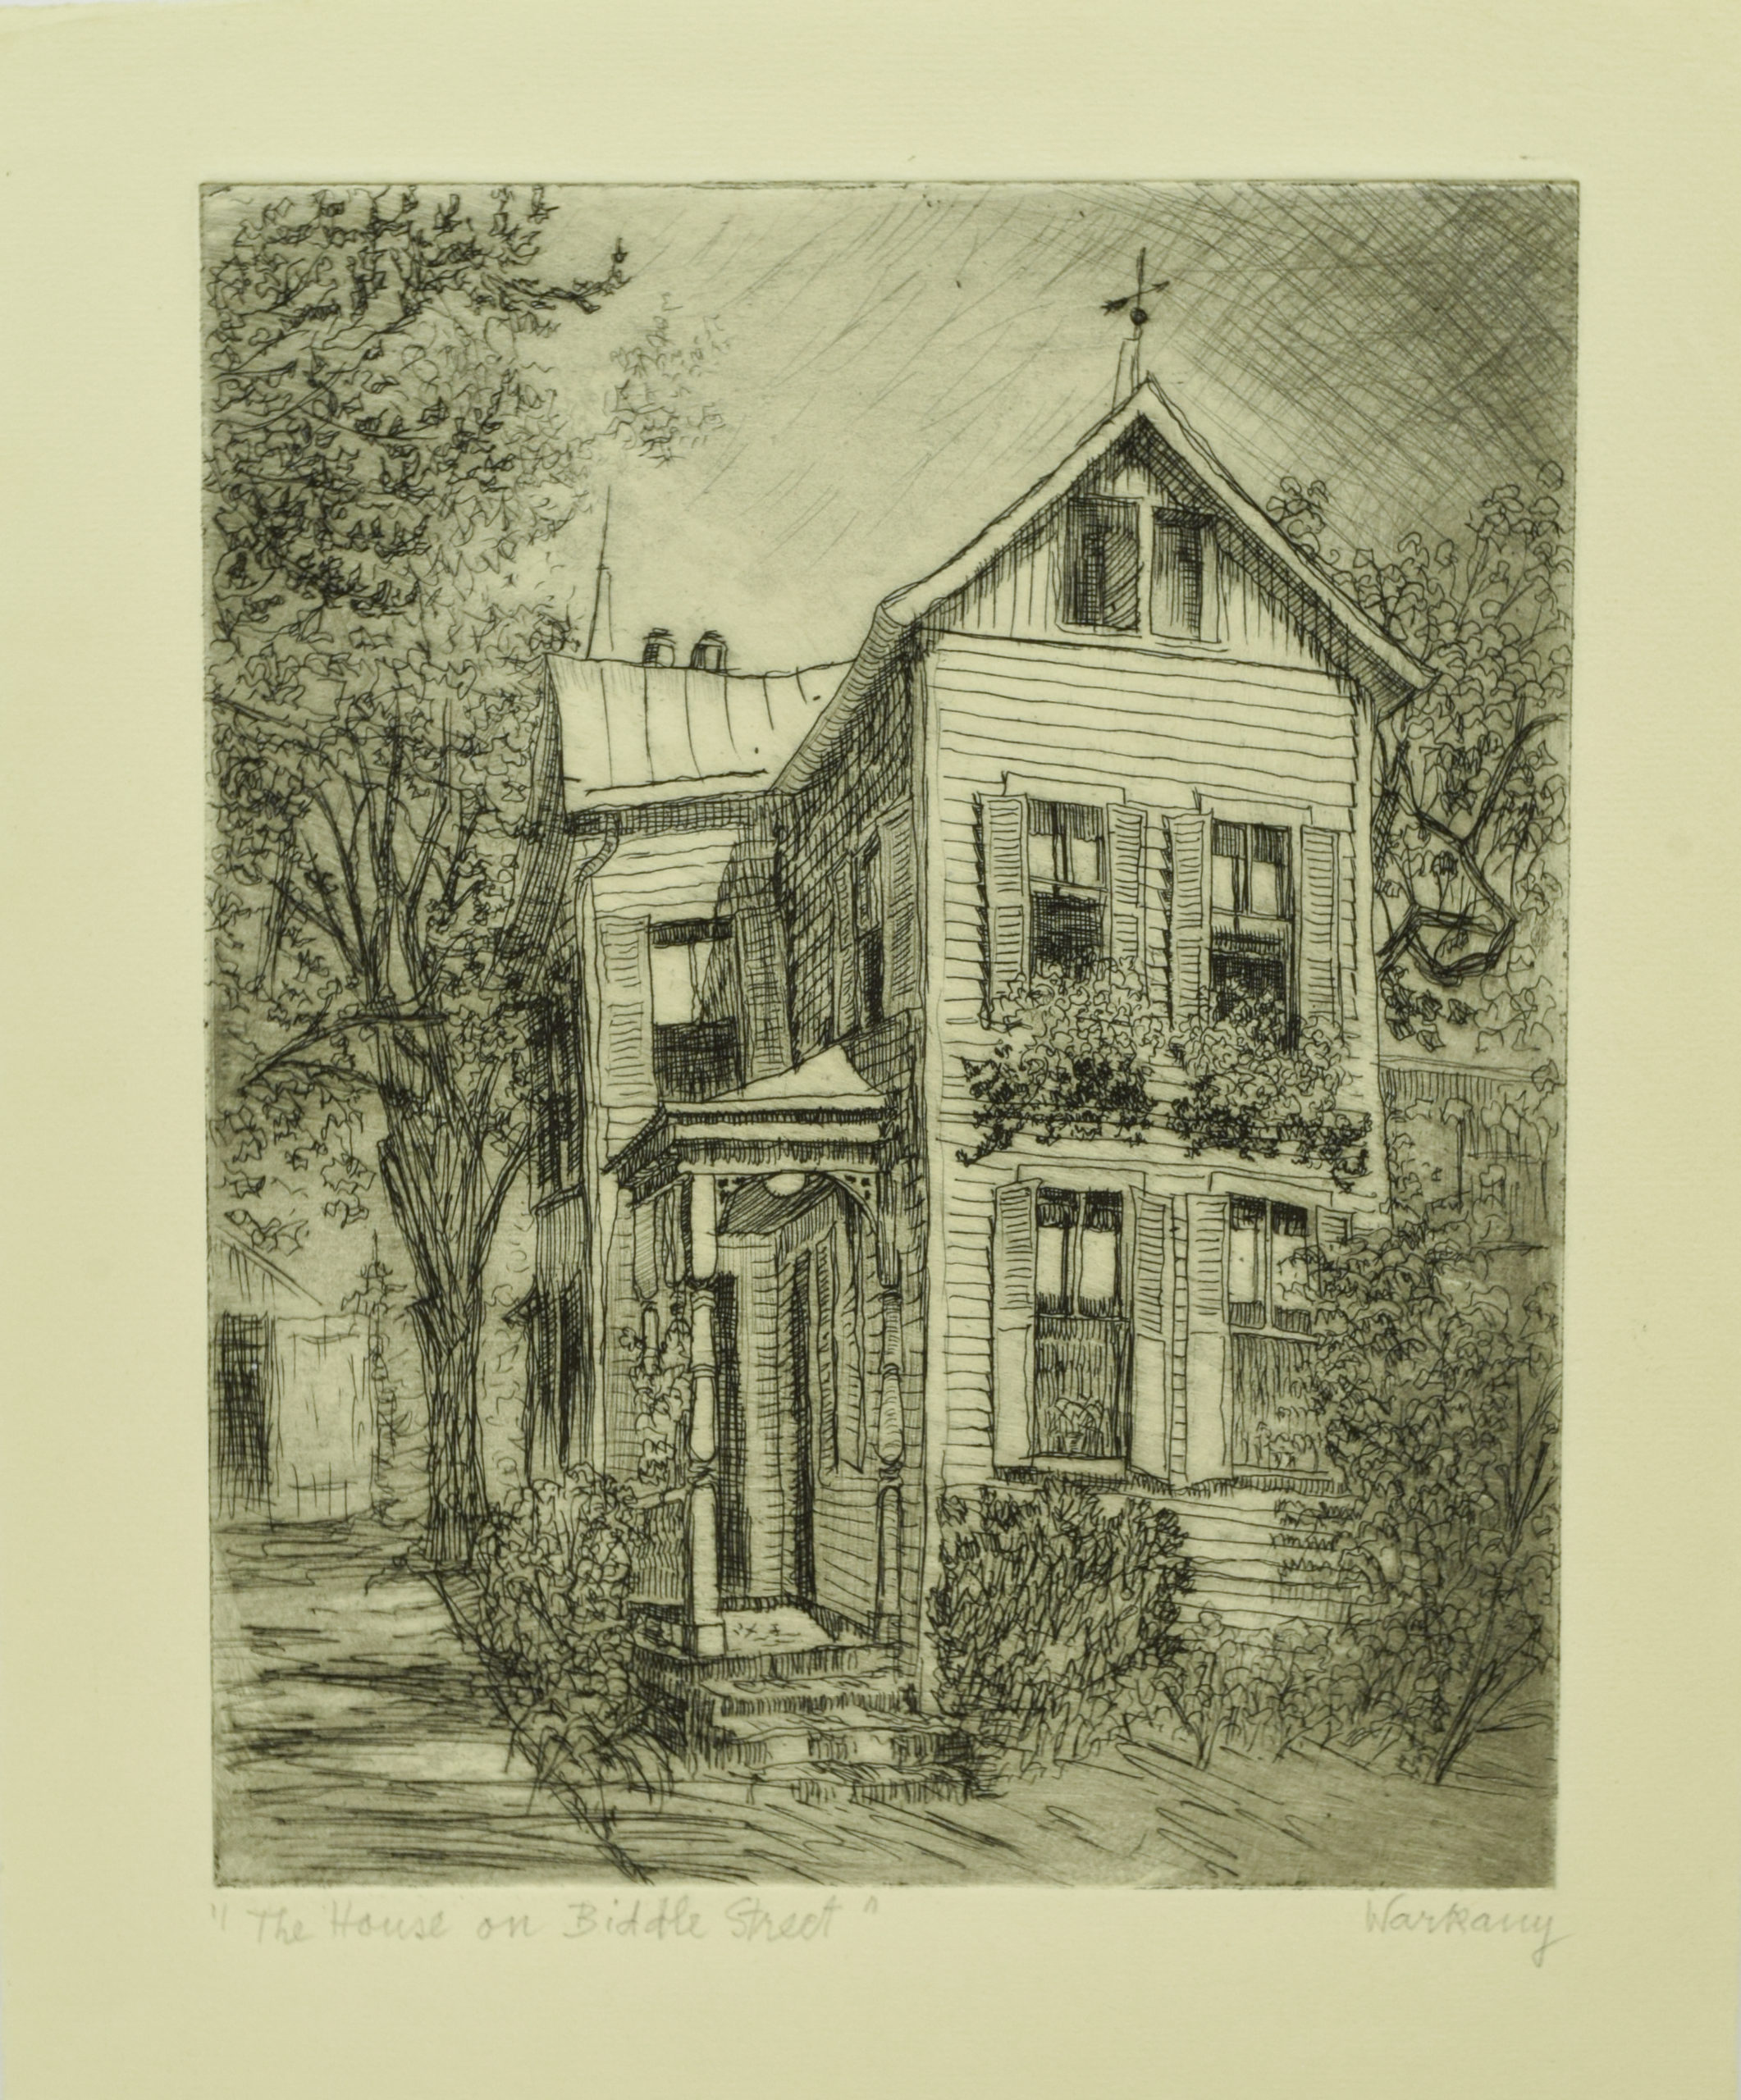 House on Biddle Street